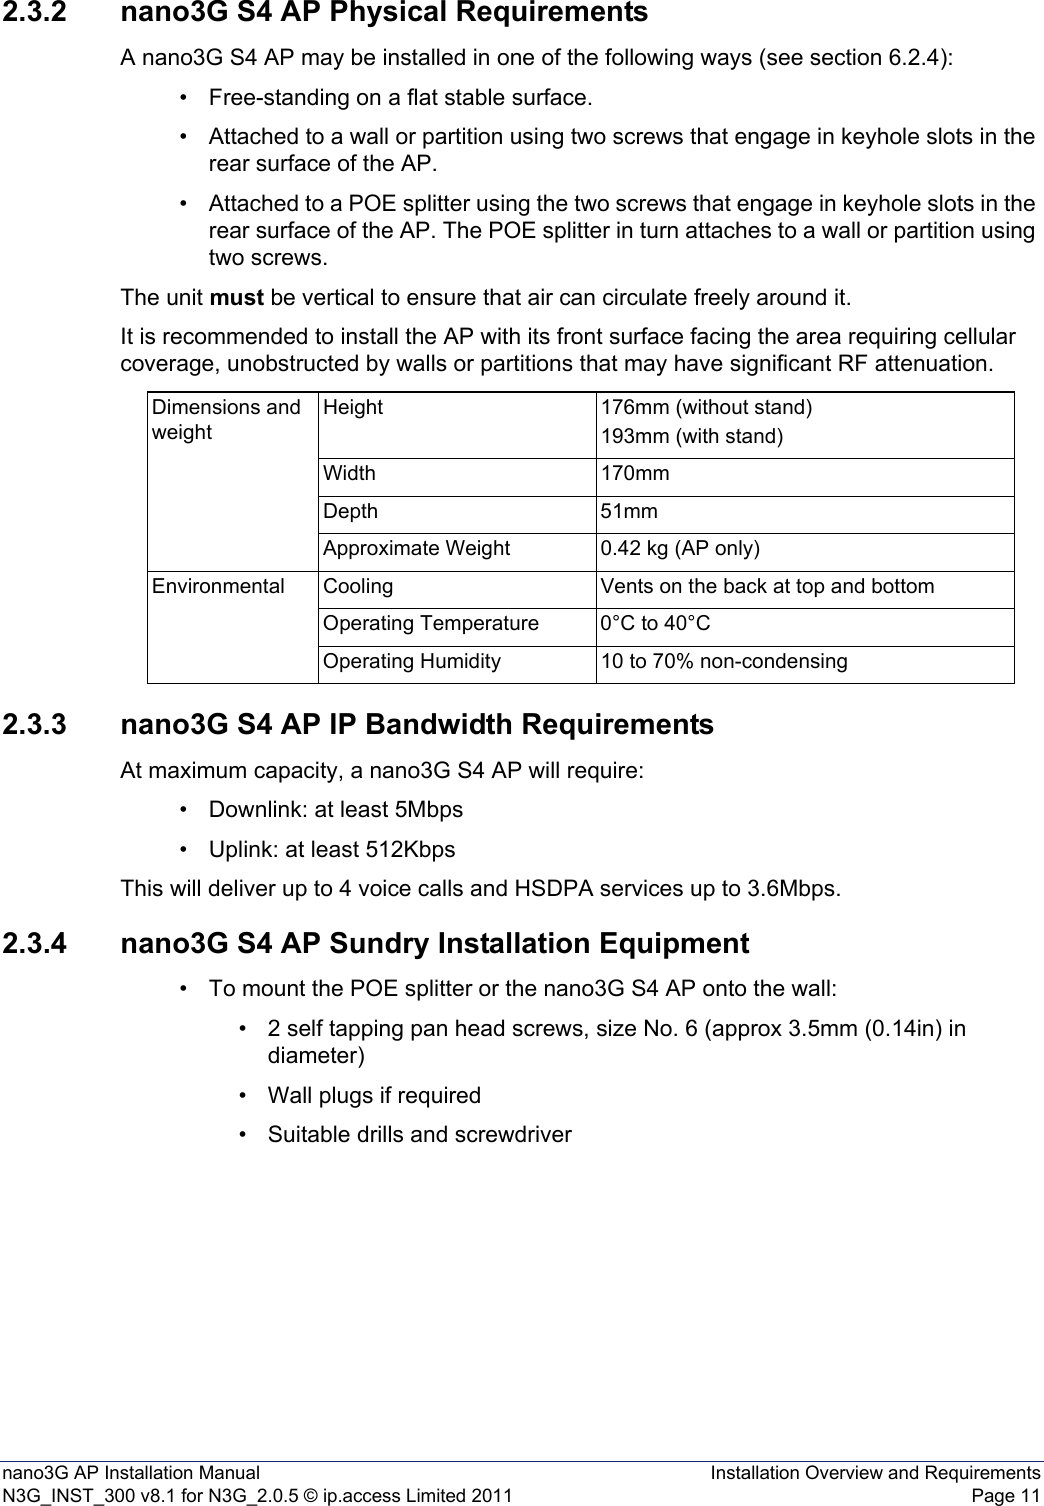 nano3G AP Installation Manual Installation Overview and RequirementsN3G_INST_300 v8.1 for N3G_2.0.5 © ip.access Limited 2011 Page 112.3.2 nano3G S4 AP Physical RequirementsA nano3G S4 AP may be installed in one of the following ways (see section 6.2.4):• Free-standing on a flat stable surface.• Attached to a wall or partition using two screws that engage in keyhole slots in the rear surface of the AP.• Attached to a POE splitter using the two screws that engage in keyhole slots in the rear surface of the AP. The POE splitter in turn attaches to a wall or partition using two screws.The unit must be vertical to ensure that air can circulate freely around it.It is recommended to install the AP with its front surface facing the area requiring cellular coverage, unobstructed by walls or partitions that may have significant RF attenuation.2.3.3 nano3G S4 AP IP Bandwidth RequirementsAt maximum capacity, a nano3G S4 AP will require:• Downlink: at least 5Mbps• Uplink: at least 512KbpsThis will deliver up to 4 voice calls and HSDPA services up to 3.6Mbps.2.3.4 nano3G S4 AP Sundry Installation Equipment• To mount the POE splitter or the nano3G S4 AP onto the wall:• 2 self tapping pan head screws, size No. 6 (approx 3.5mm (0.14in) in diameter)• Wall plugs if required• Suitable drills and screwdriverDimensions and weightHeight 176mm (without stand)193mm (with stand)Width 170mmDepth 51mmApproximate Weight 0.42 kg (AP only)Environmental Cooling Vents on the back at top and bottomOperating Temperature 0°C to 40°COperating Humidity 10 to 70% non-condensing